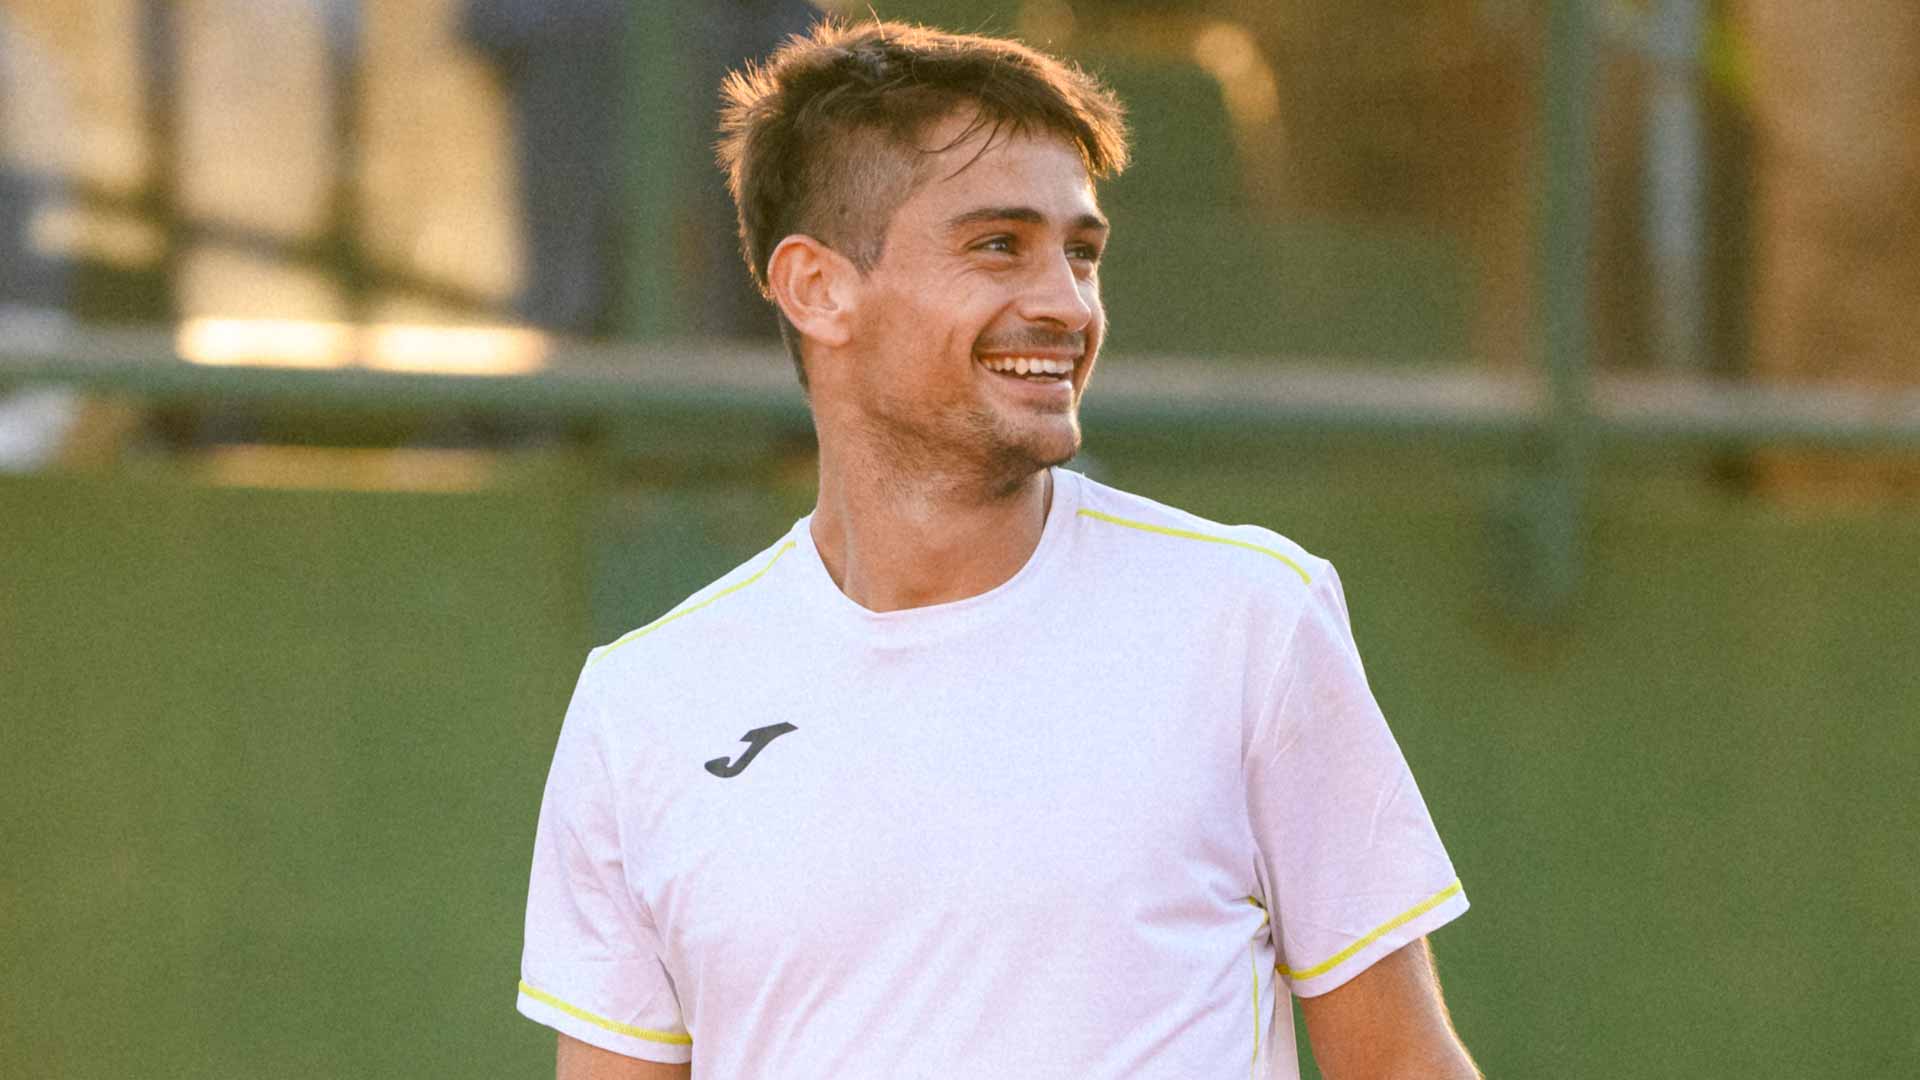 Mariano Navone is No. 31 in the PIF ATP Rankings.